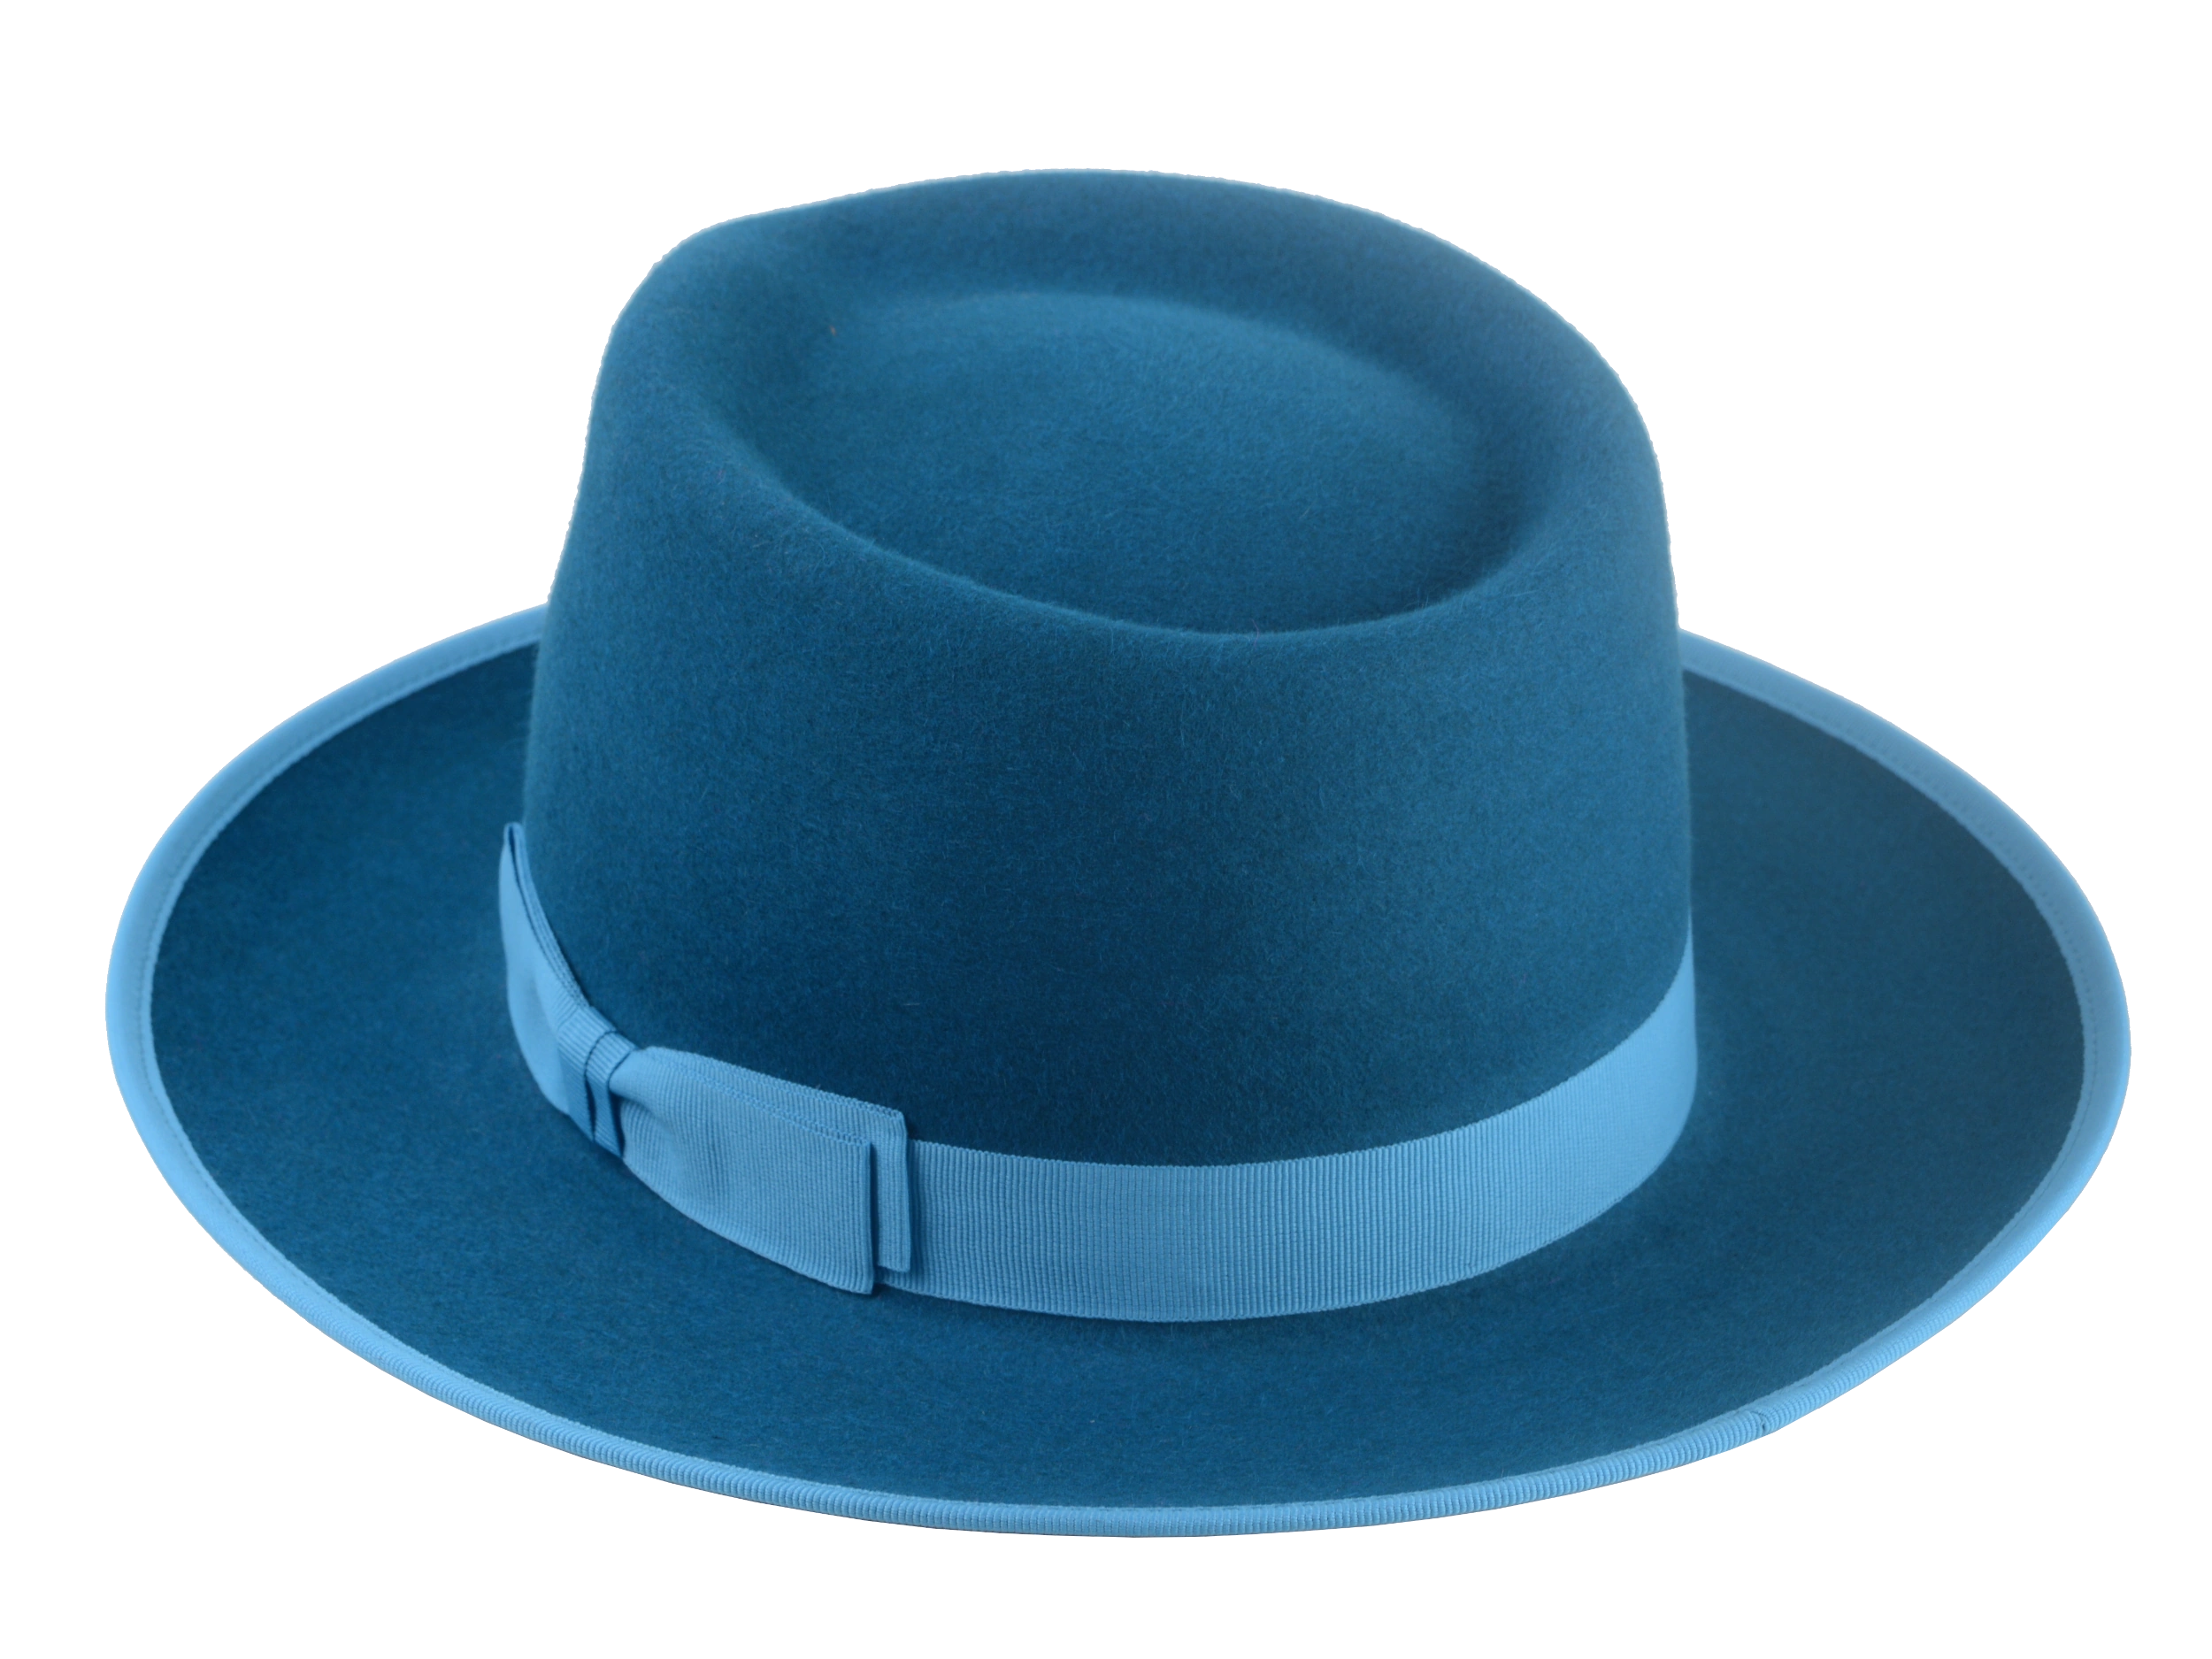 Close-up of Equinox dark teal fedora hat with sky grosgrain ribbon band and bow